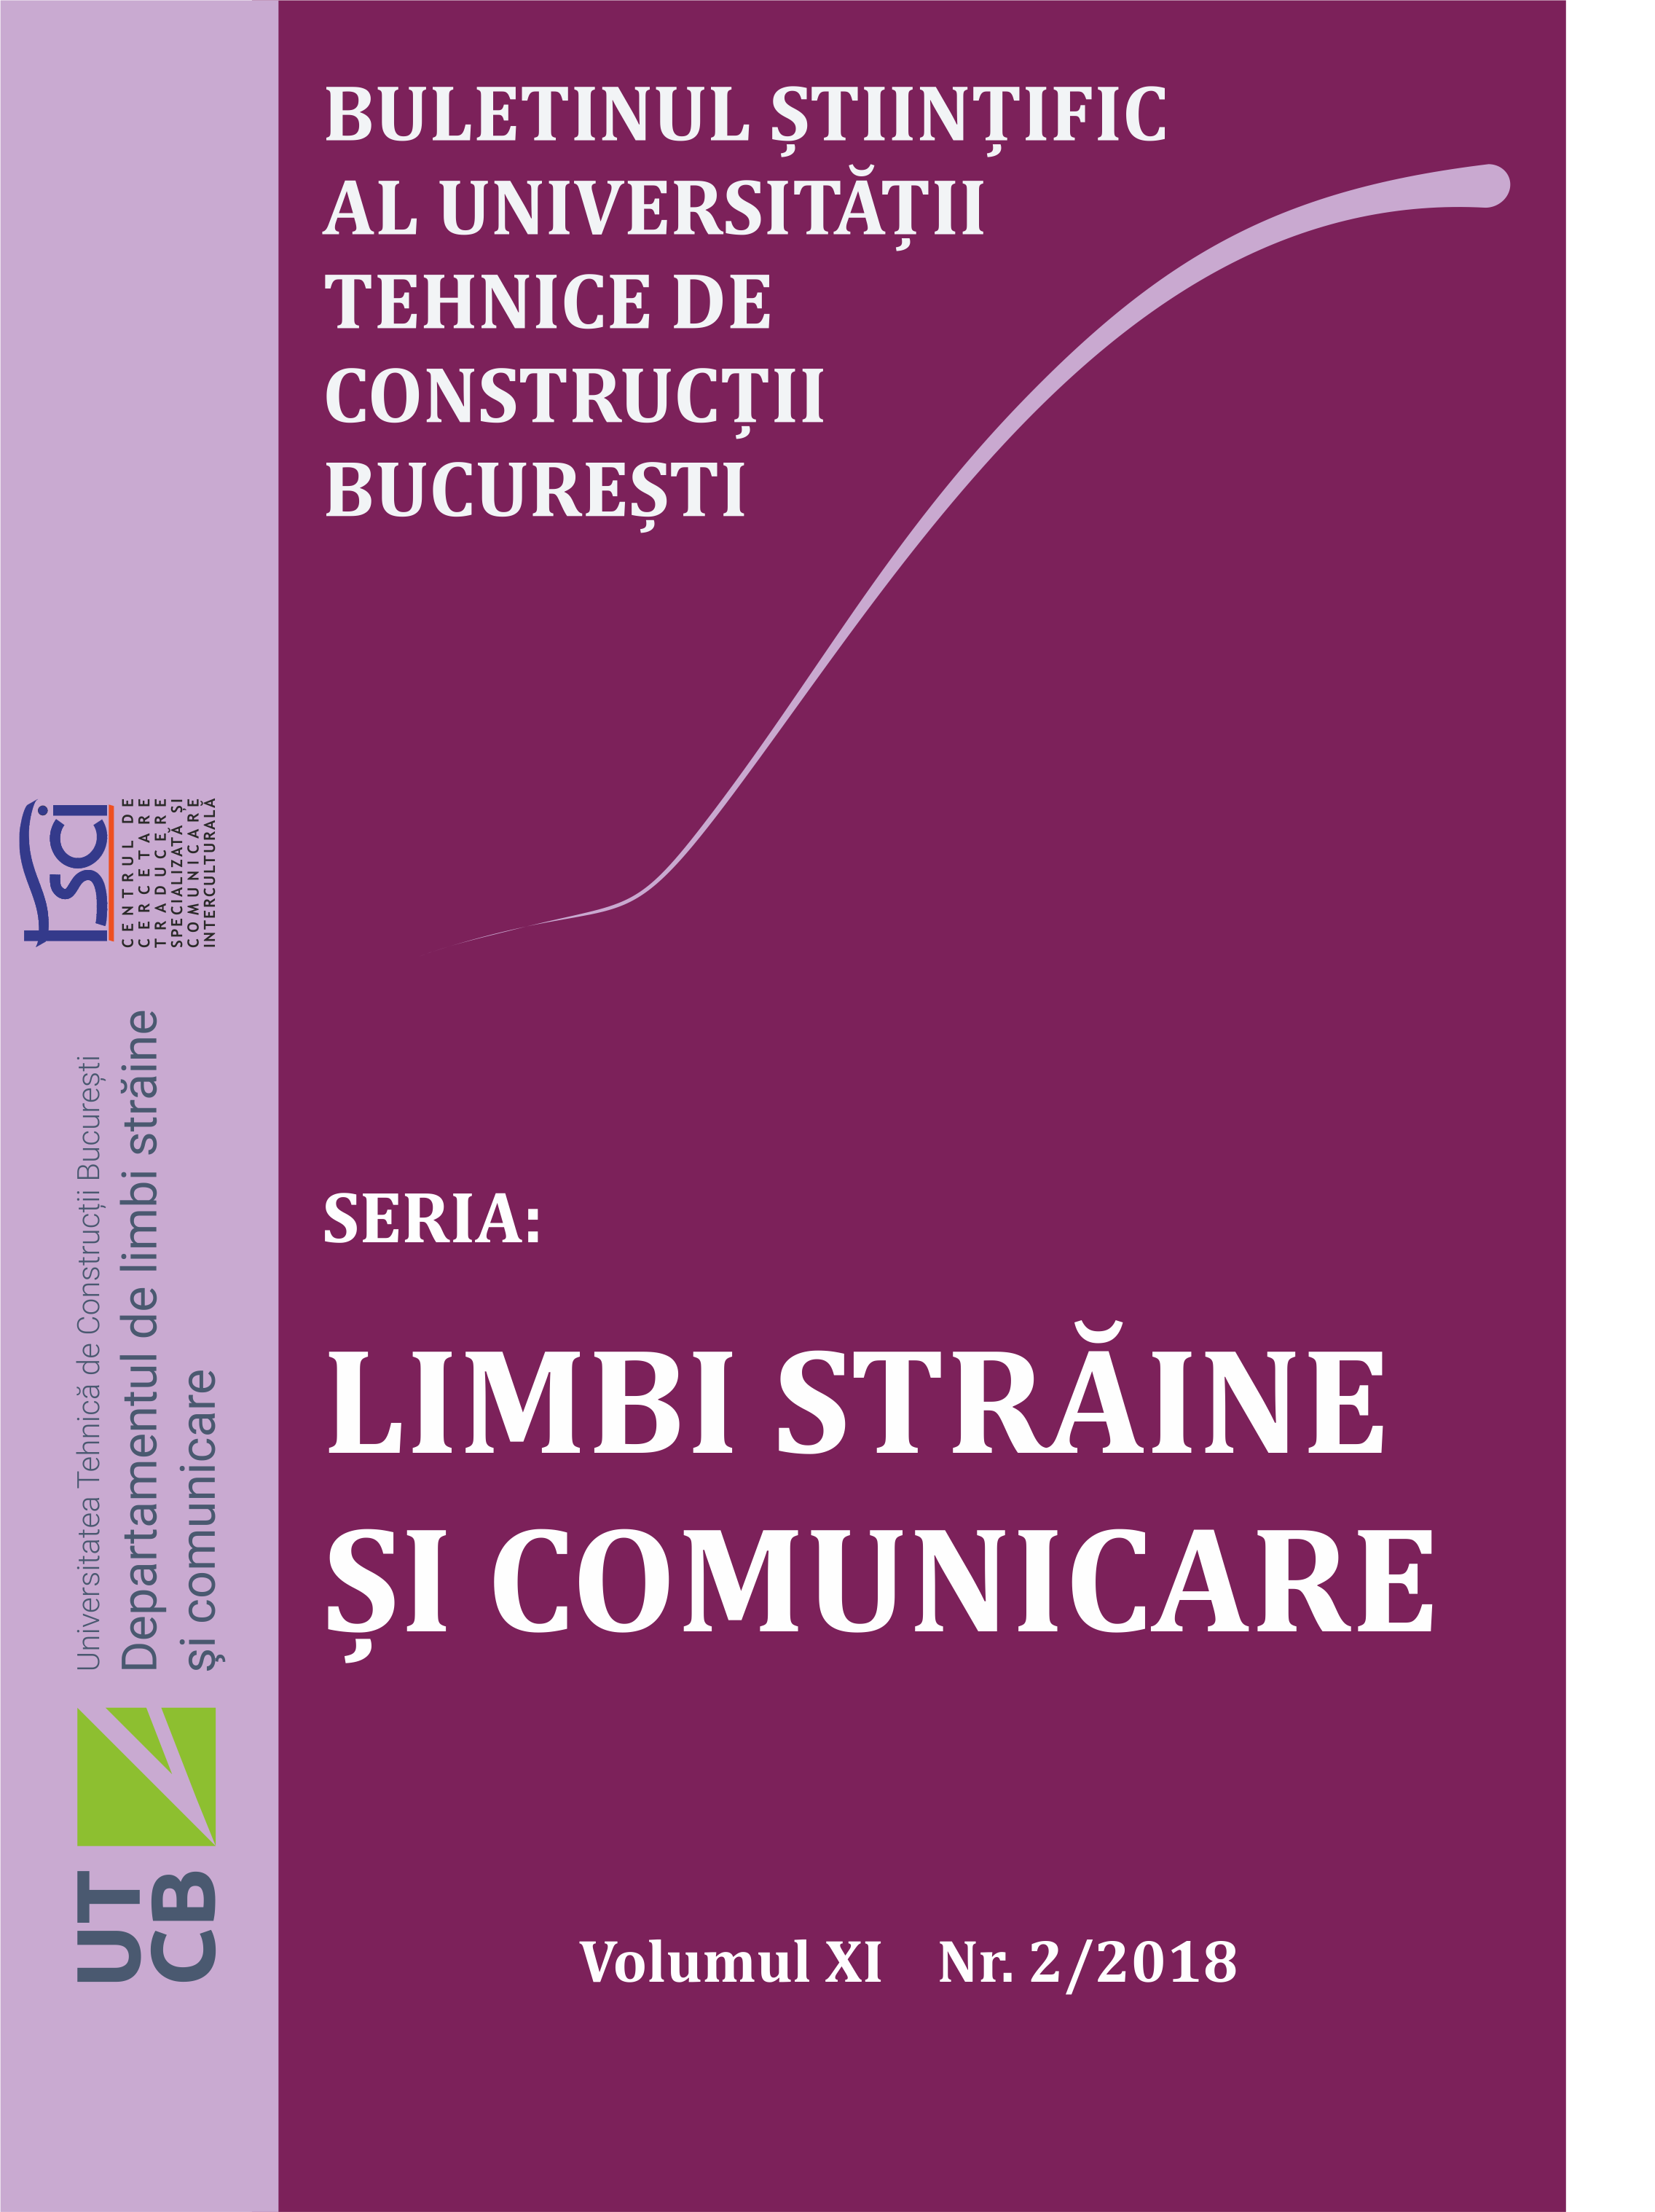 A SHORT ANALYSIS OF PUBLIC SERVICE
DOCUMENTS AS A PRE-TRANSLATION STAGE: A
DISCOURSE-AS-GENRE AND DISCOURSE-AS-TEXT
APPROACH TO A FIRST AID LEAFLET Cover Image